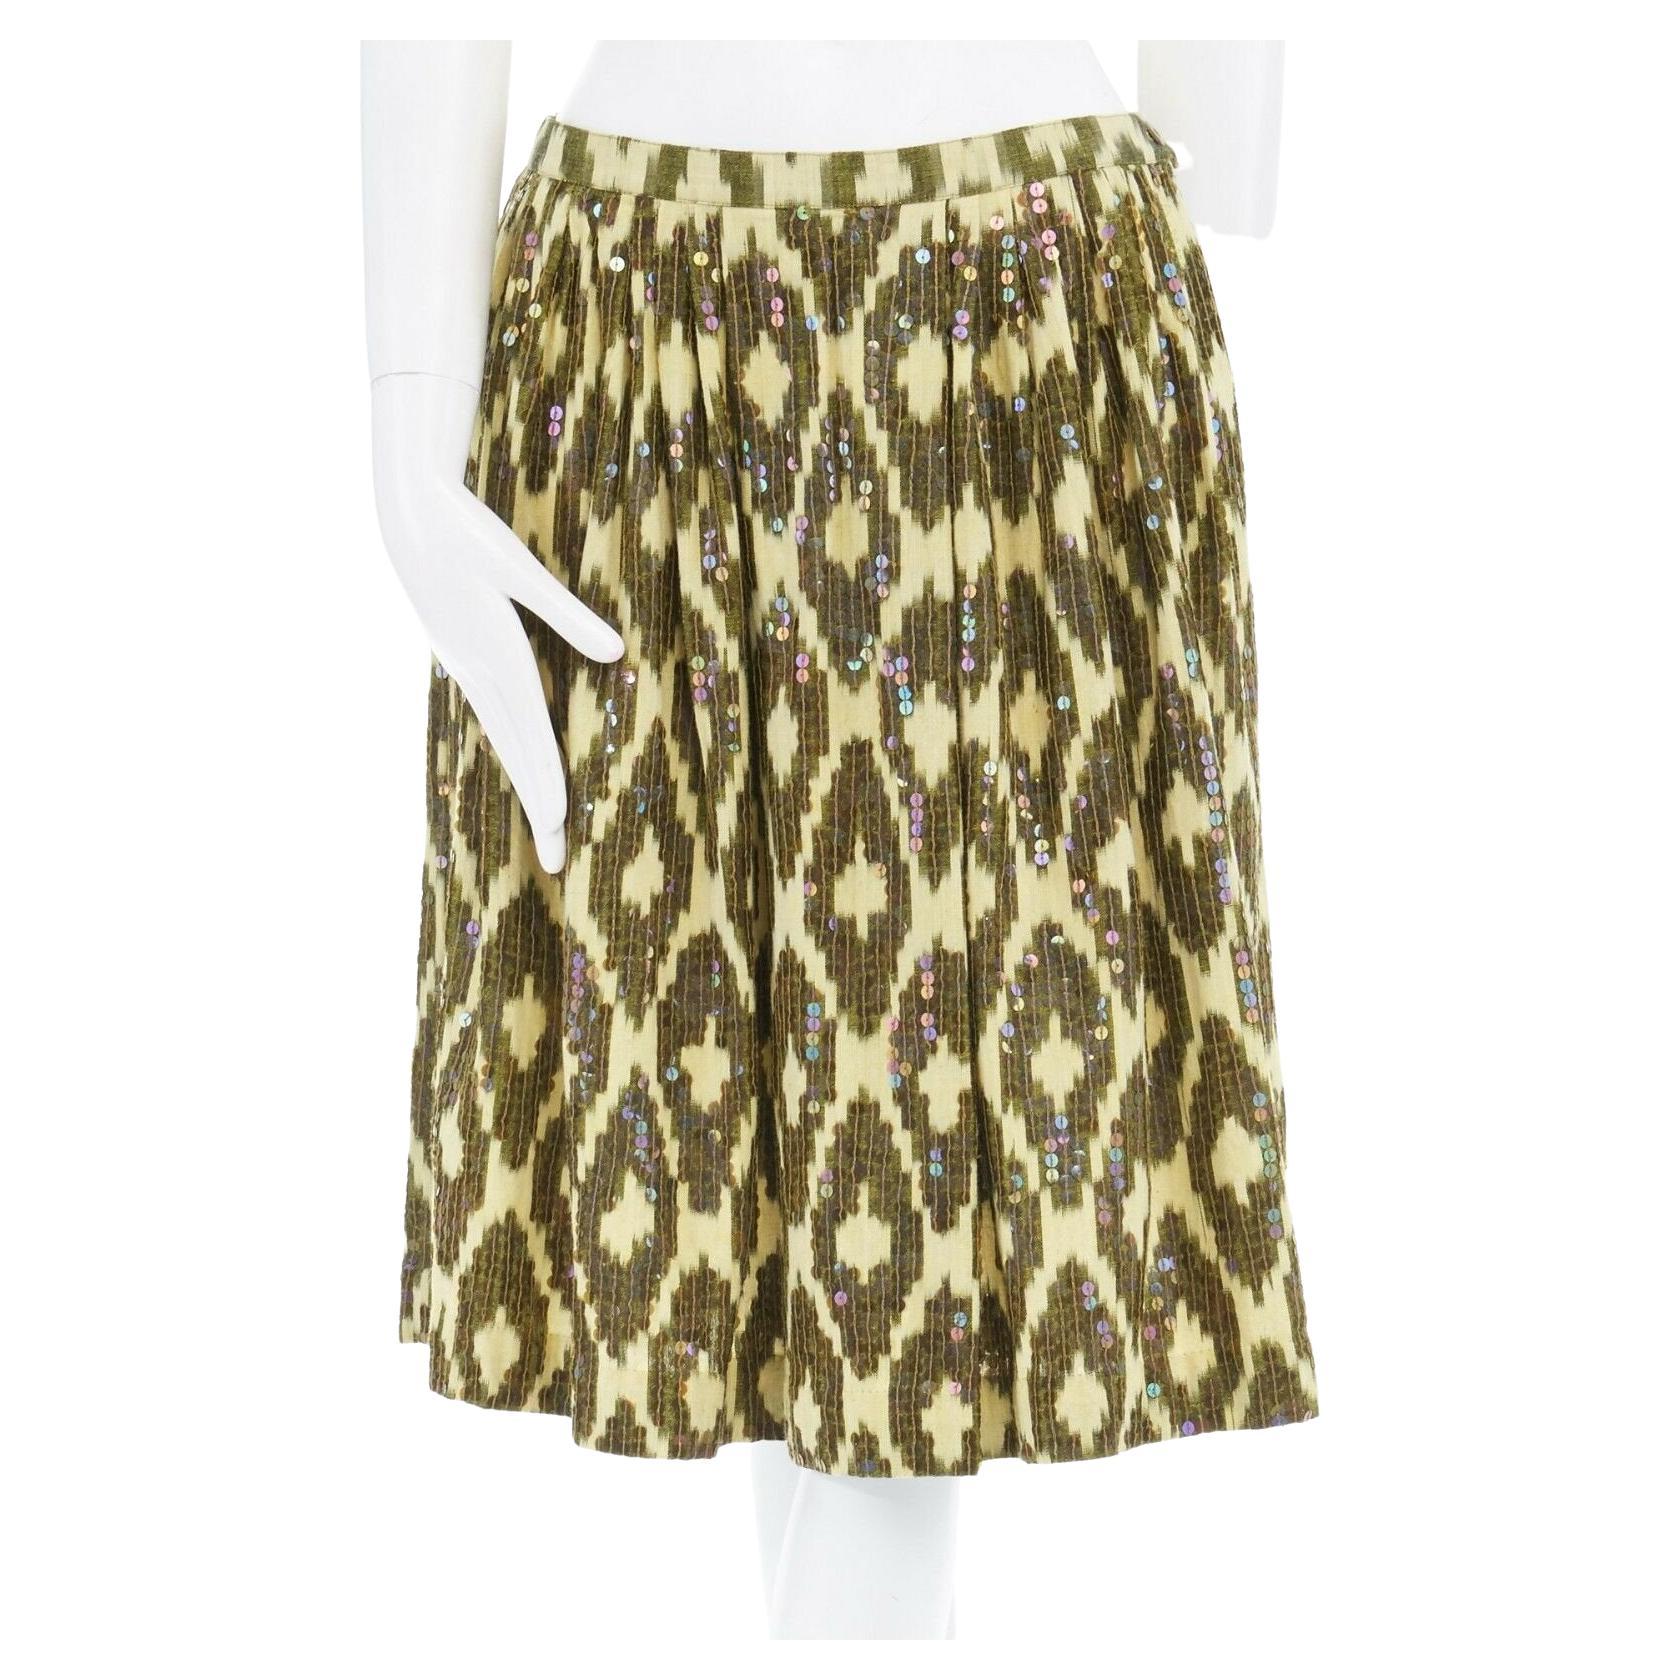 ASHISH yellow abstract leopard sport iridescent sequin embellished skirt S